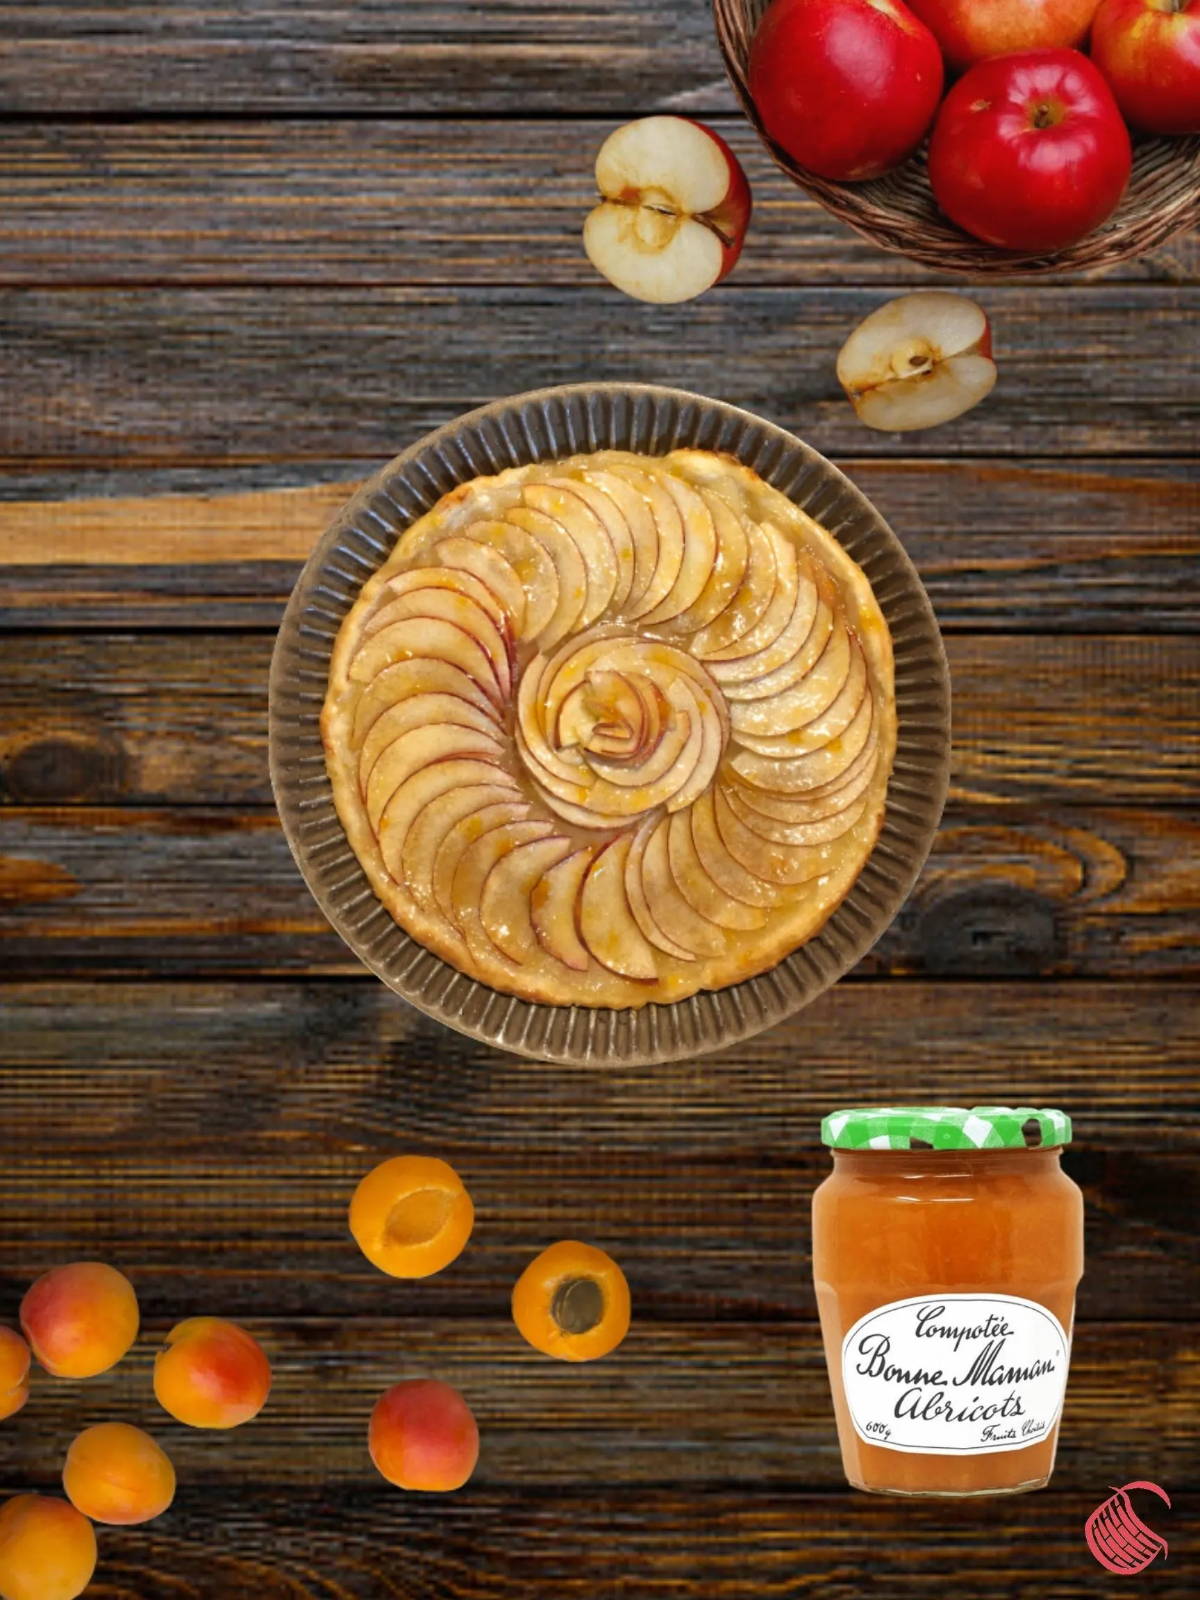 French apple and apricot compote tart.